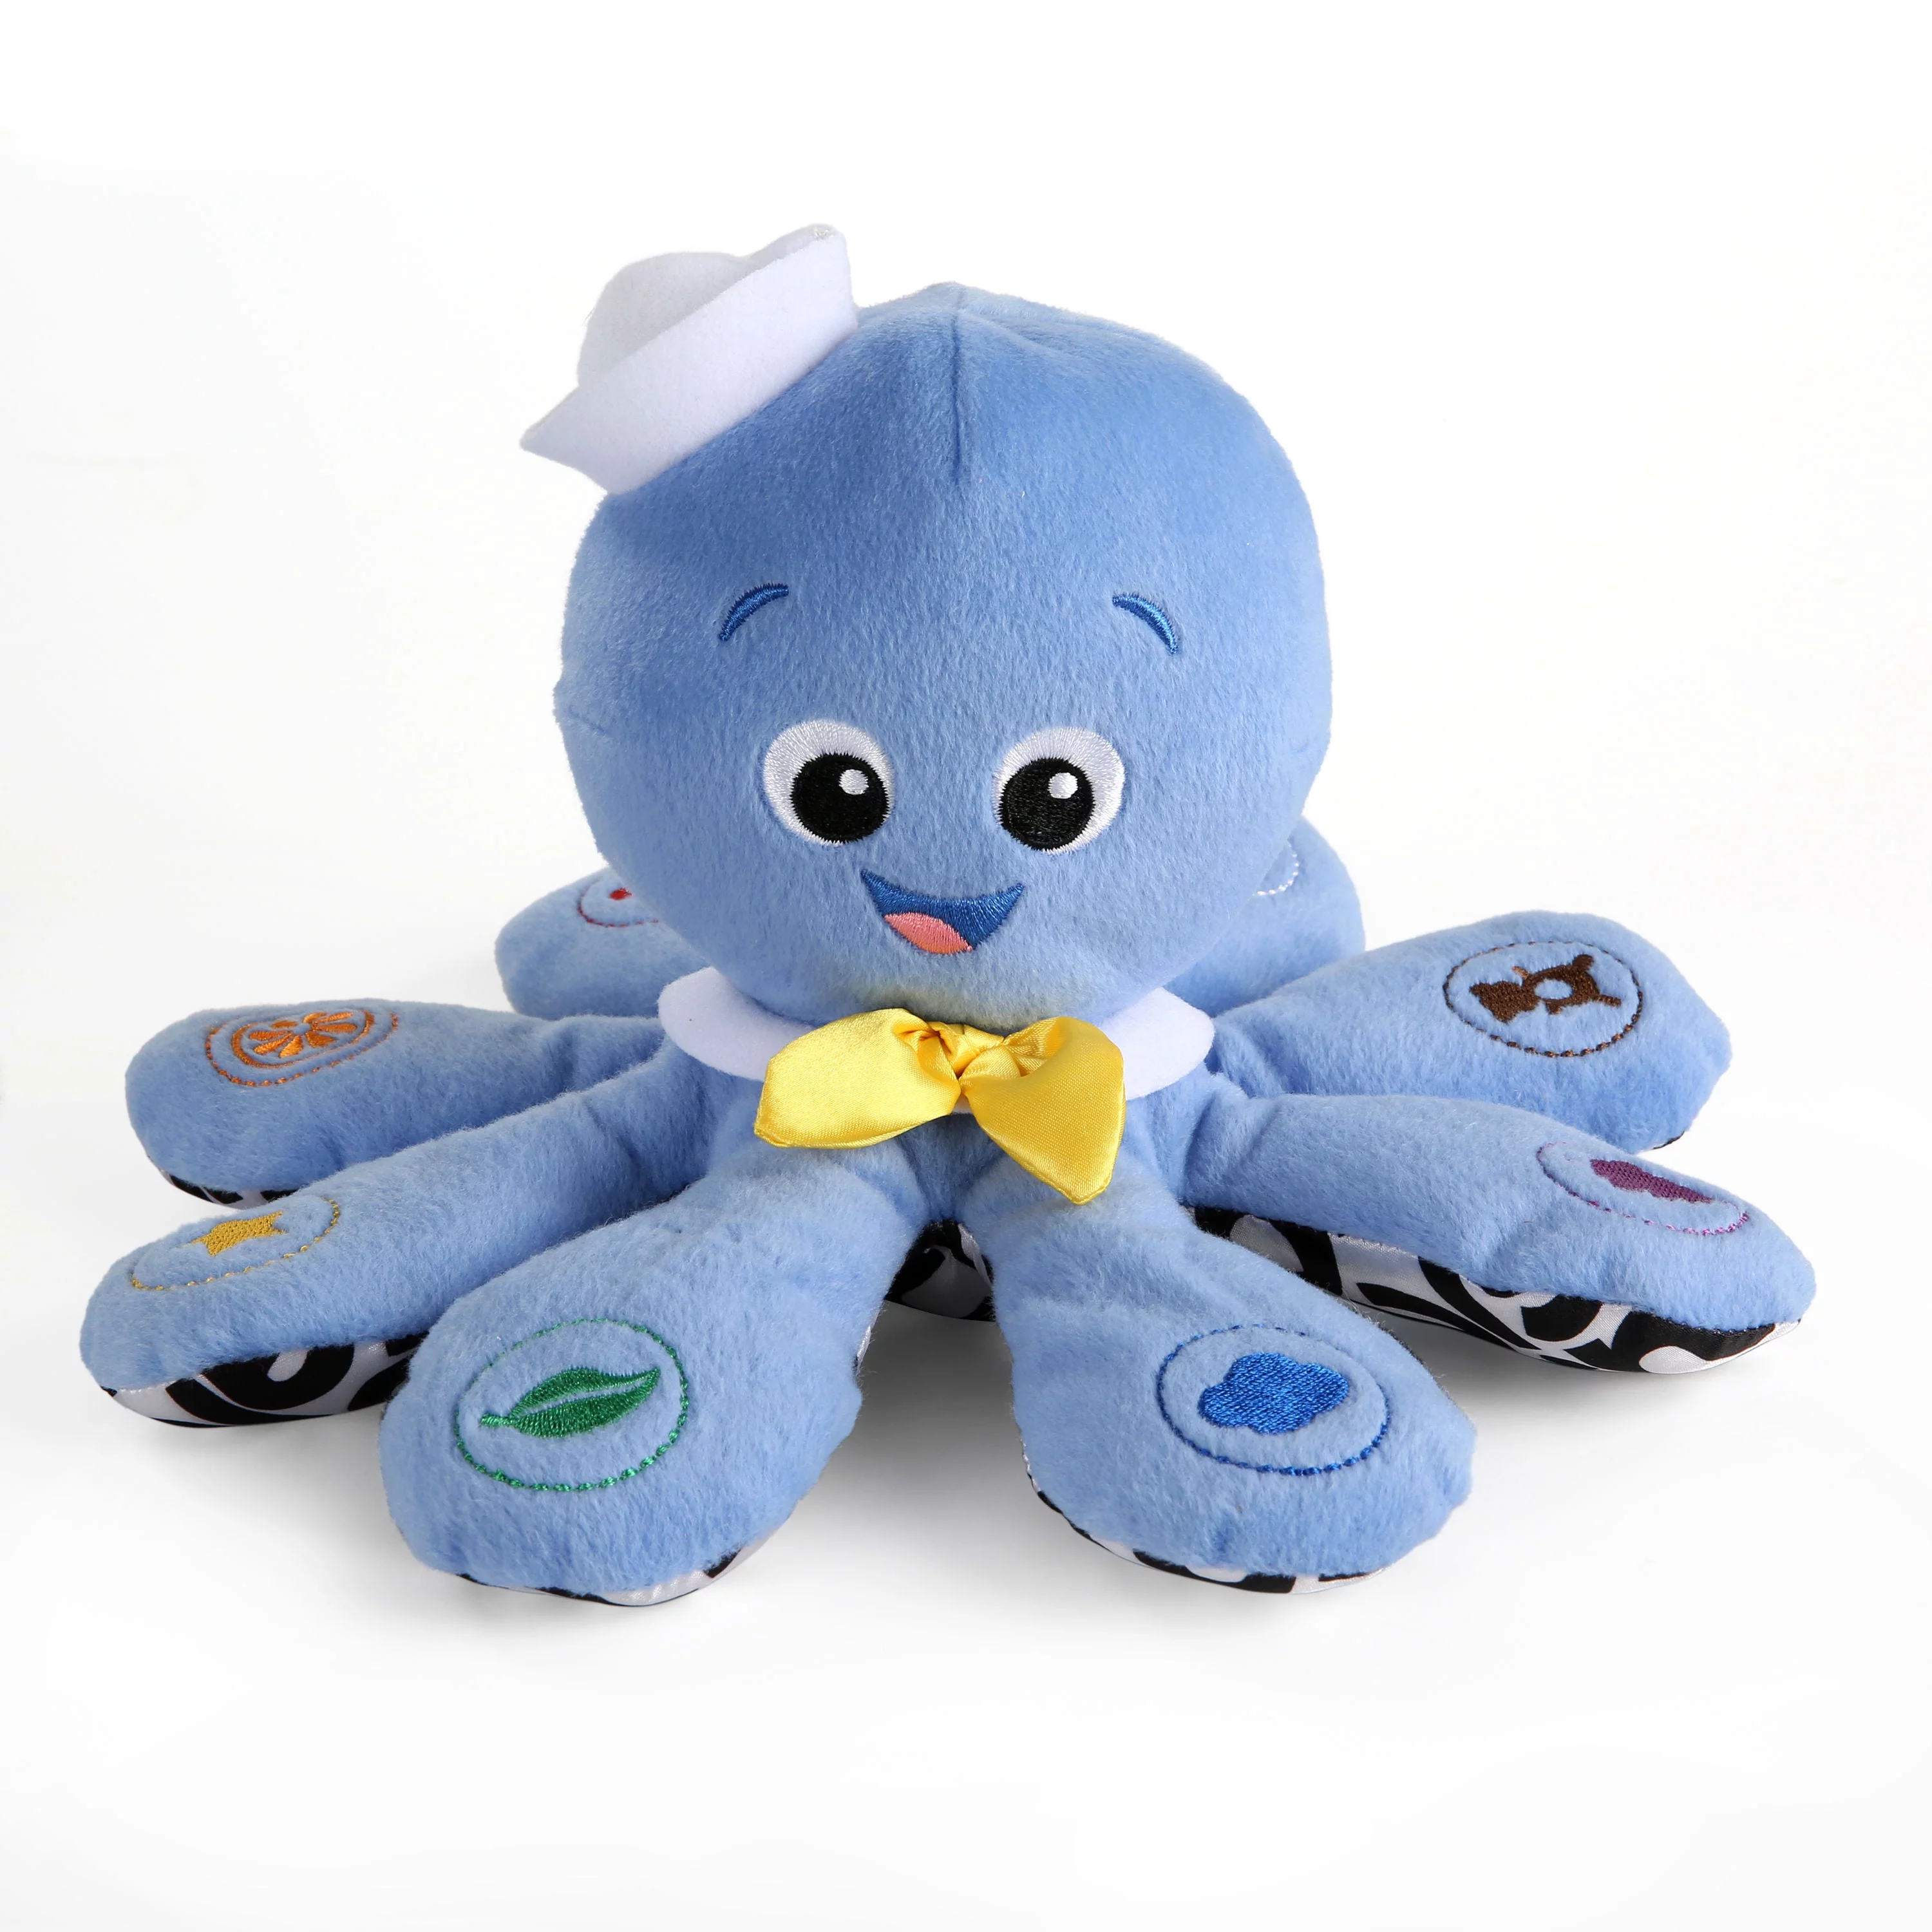 Baby Einstein Octoplush Musical Plush Learning Baby Toy for Infants, Unisex